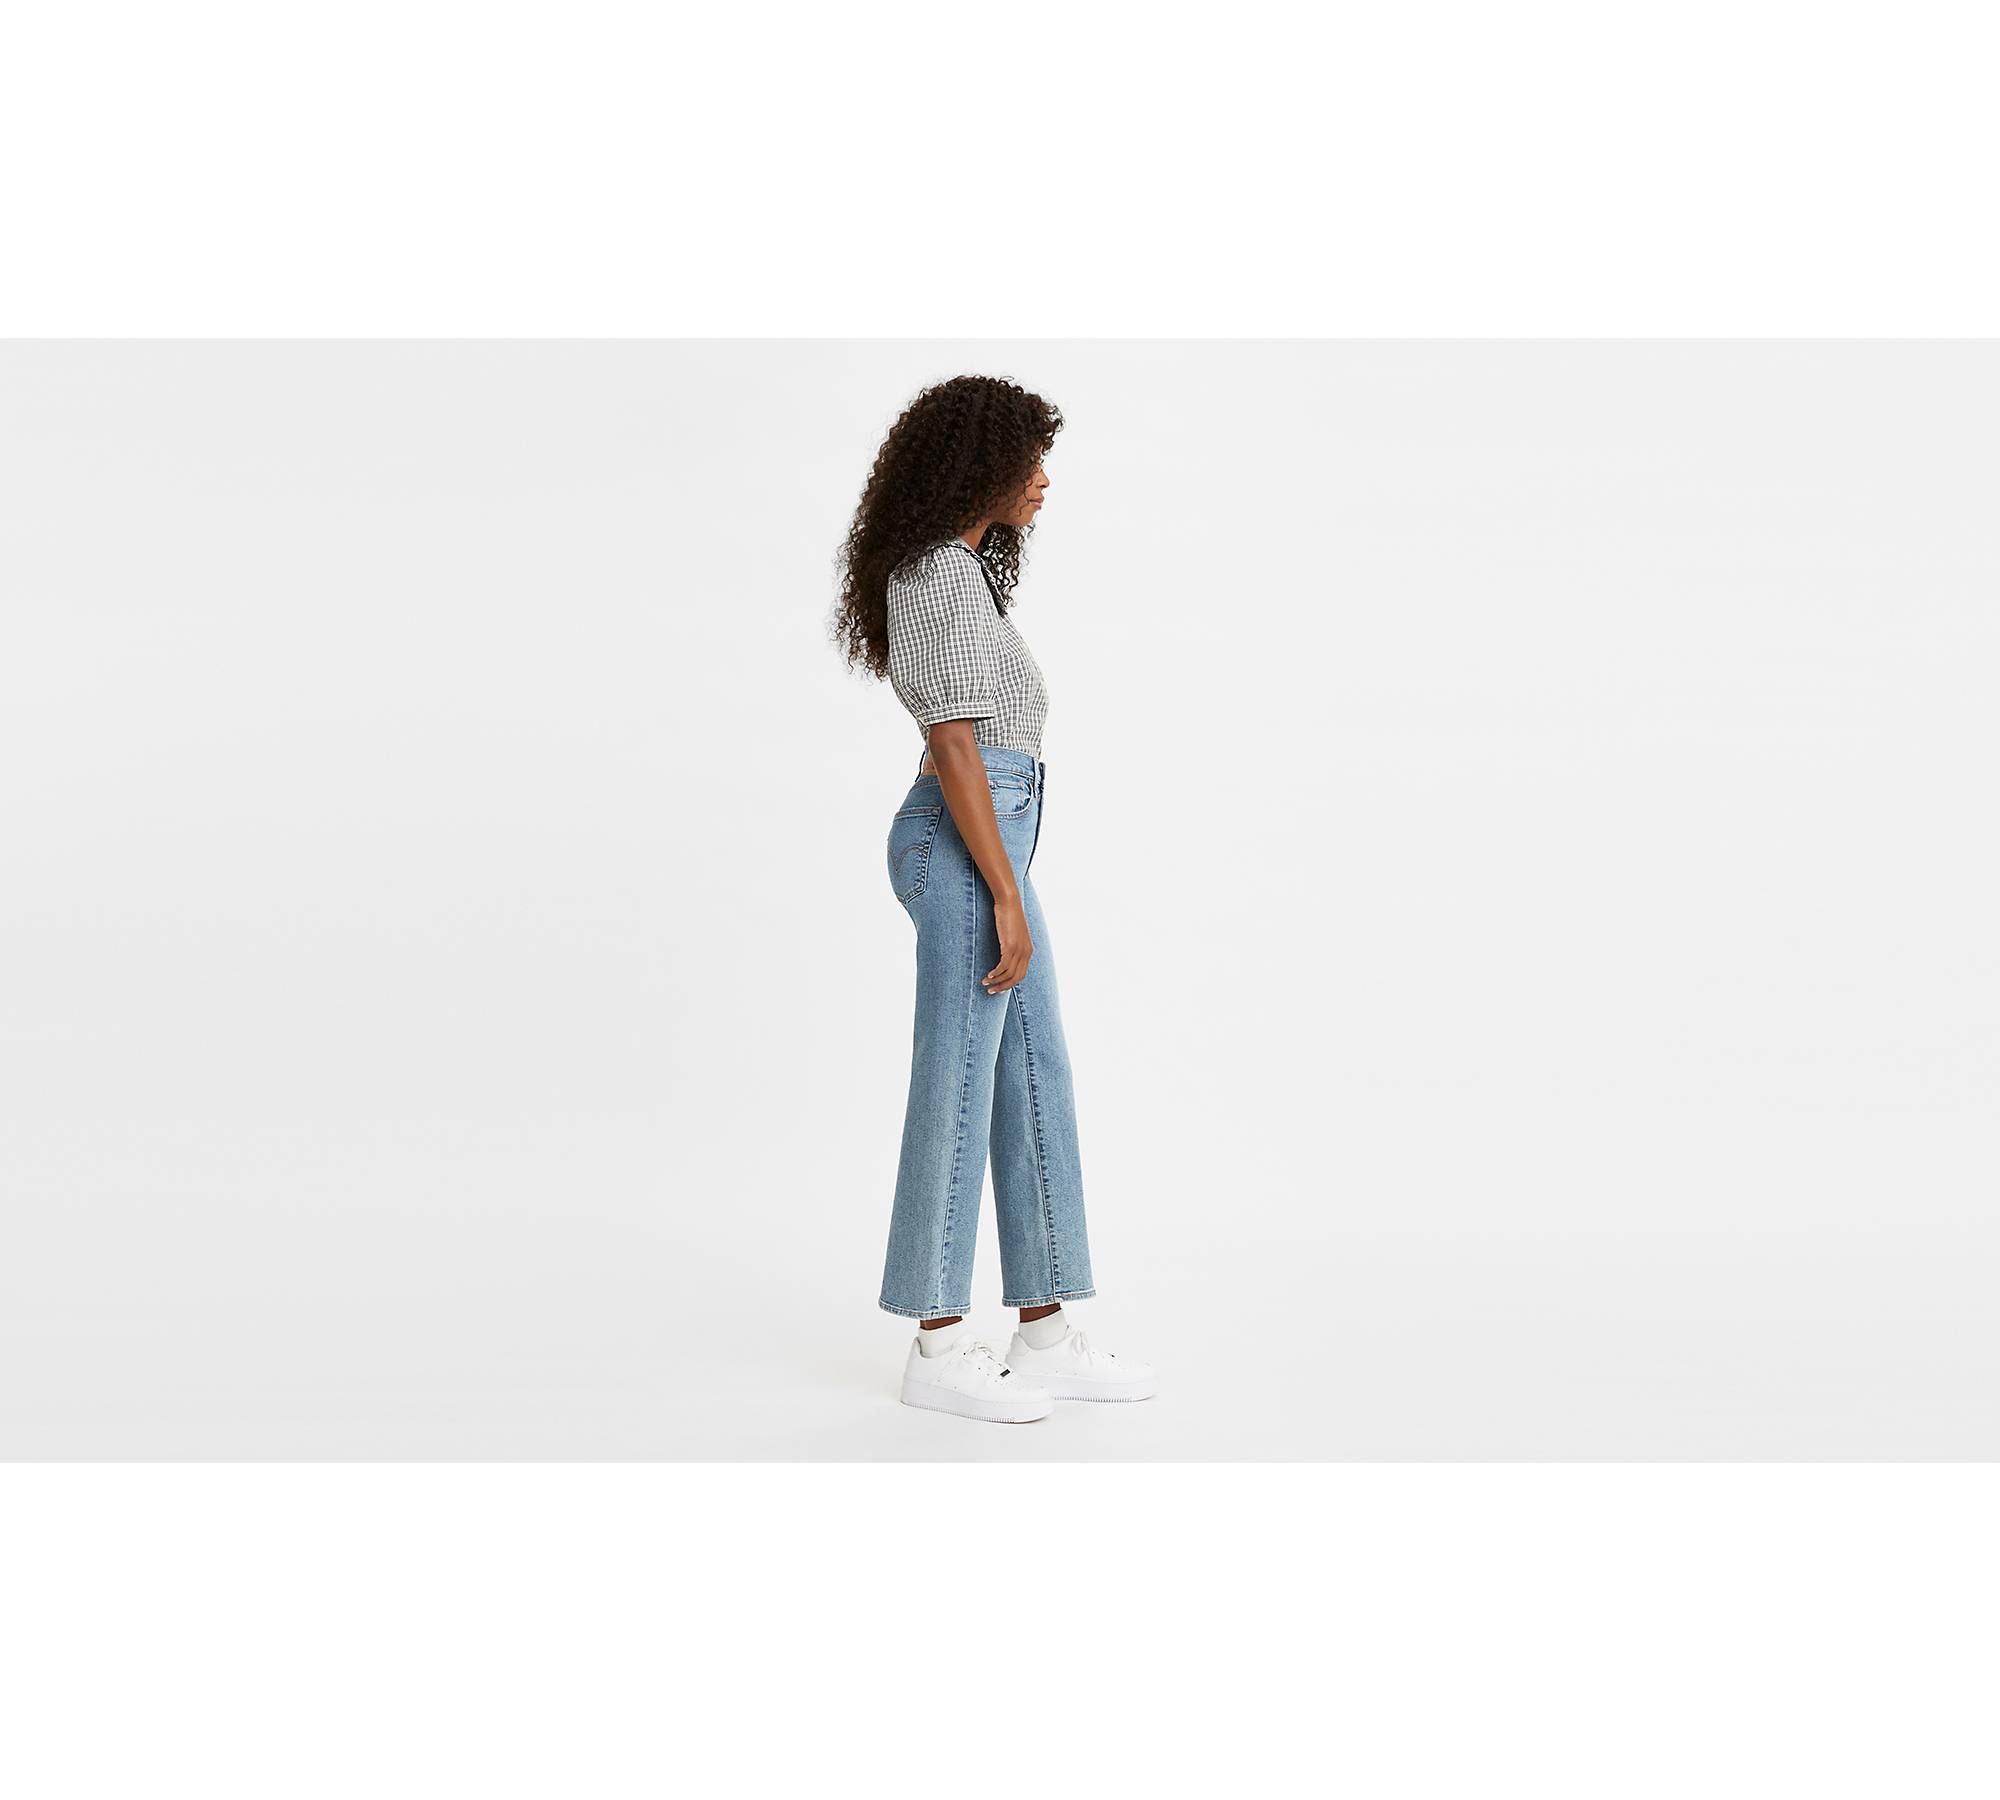 High Rise Cropped Flare Women's Jeans